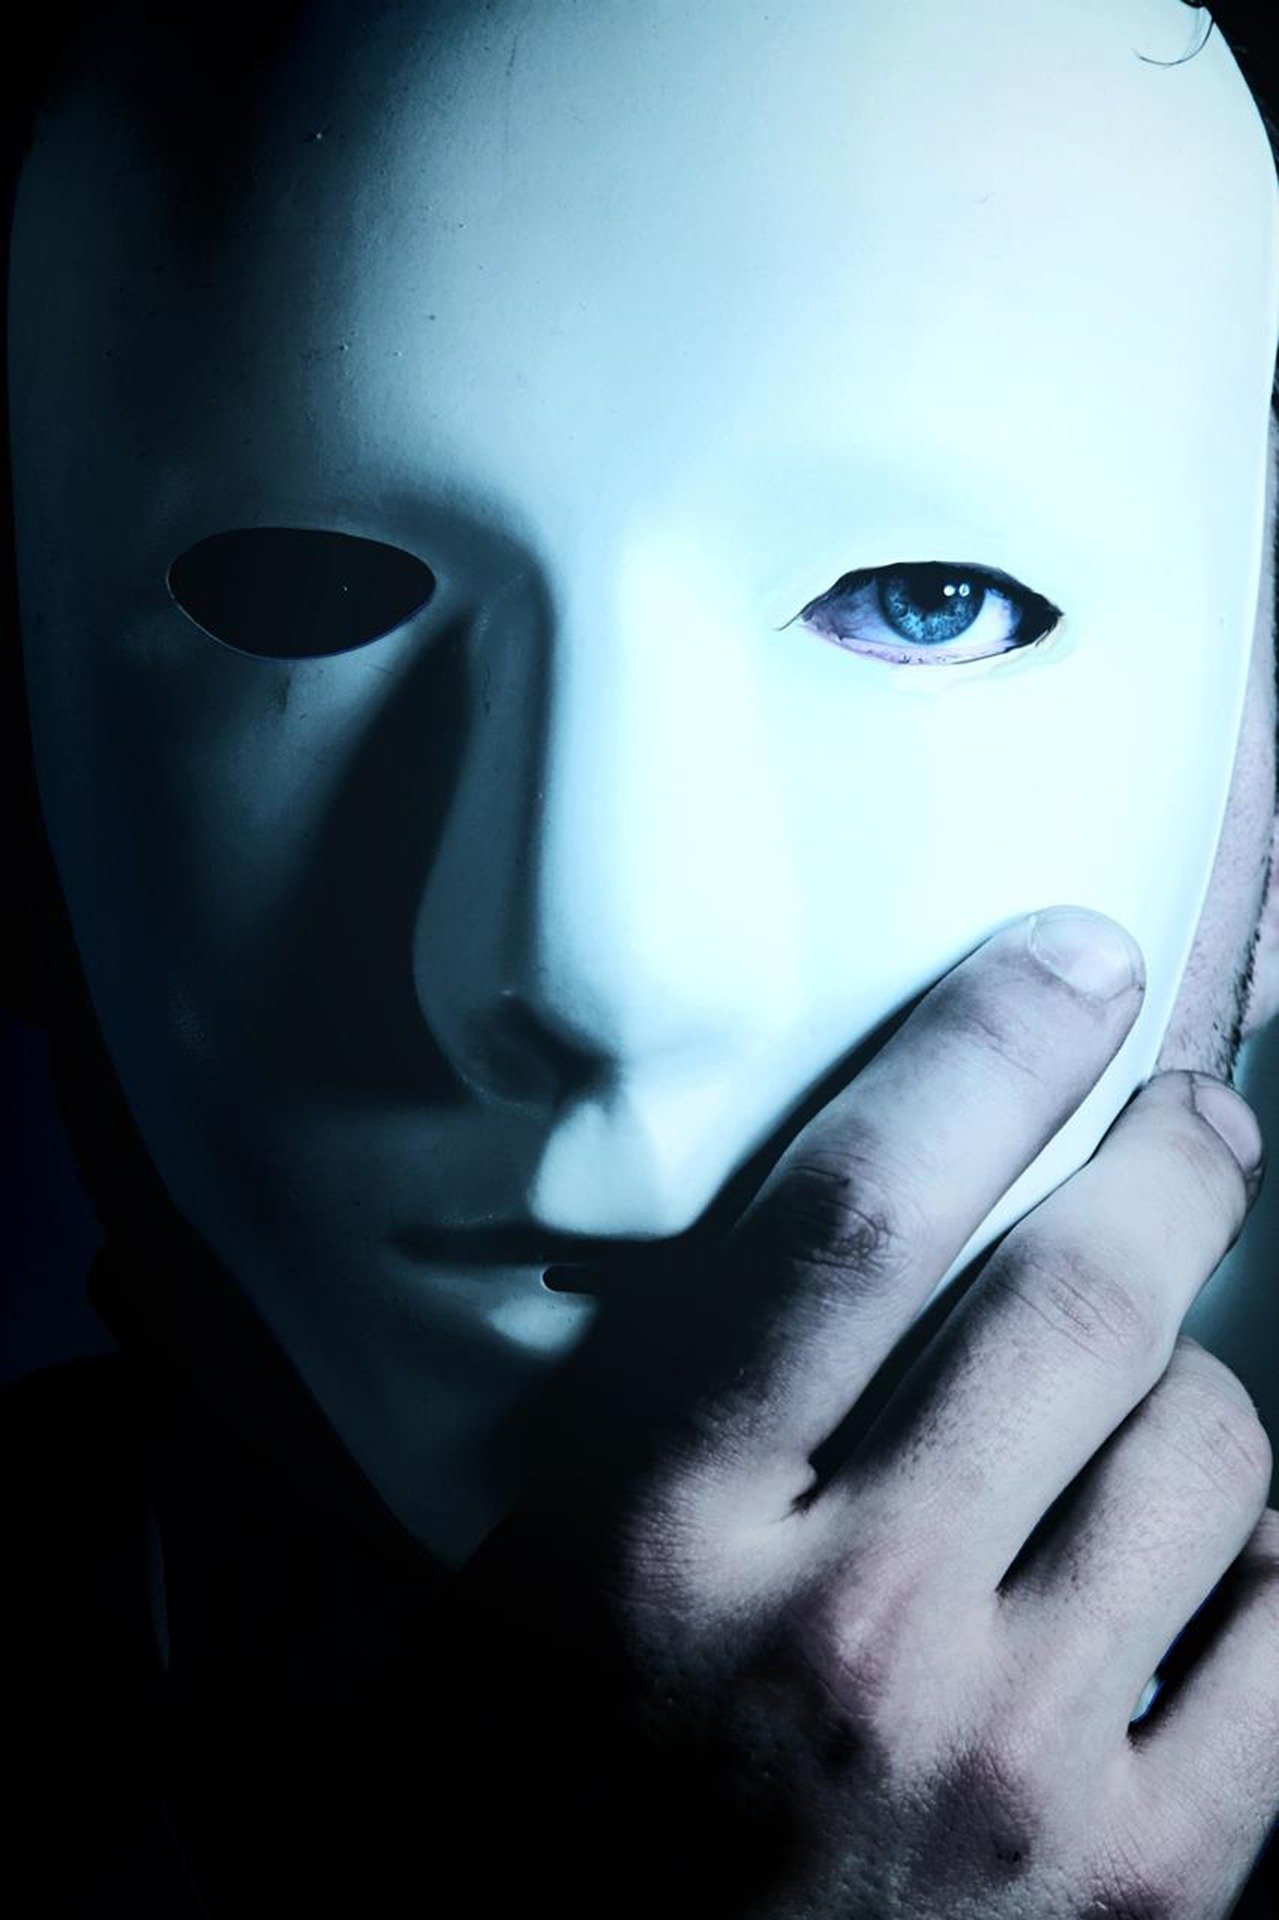 Pictured - A man with blue eyes wearing a mask with his hand holding it | Source: Pixabay 